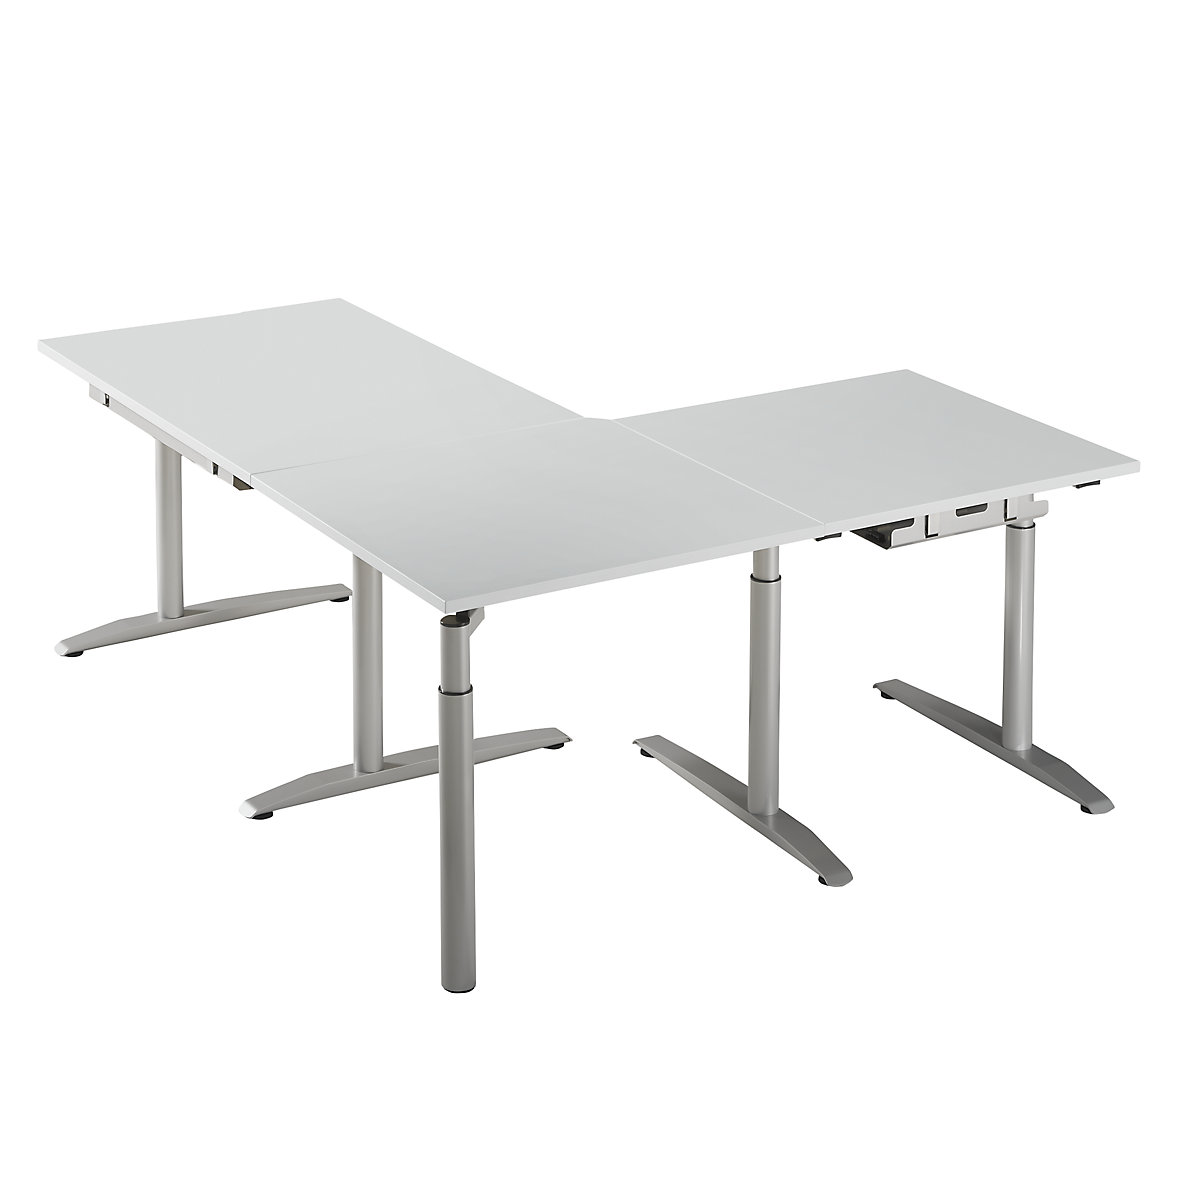 Linking top, height adjustable from 680 - 820 mm HANNA